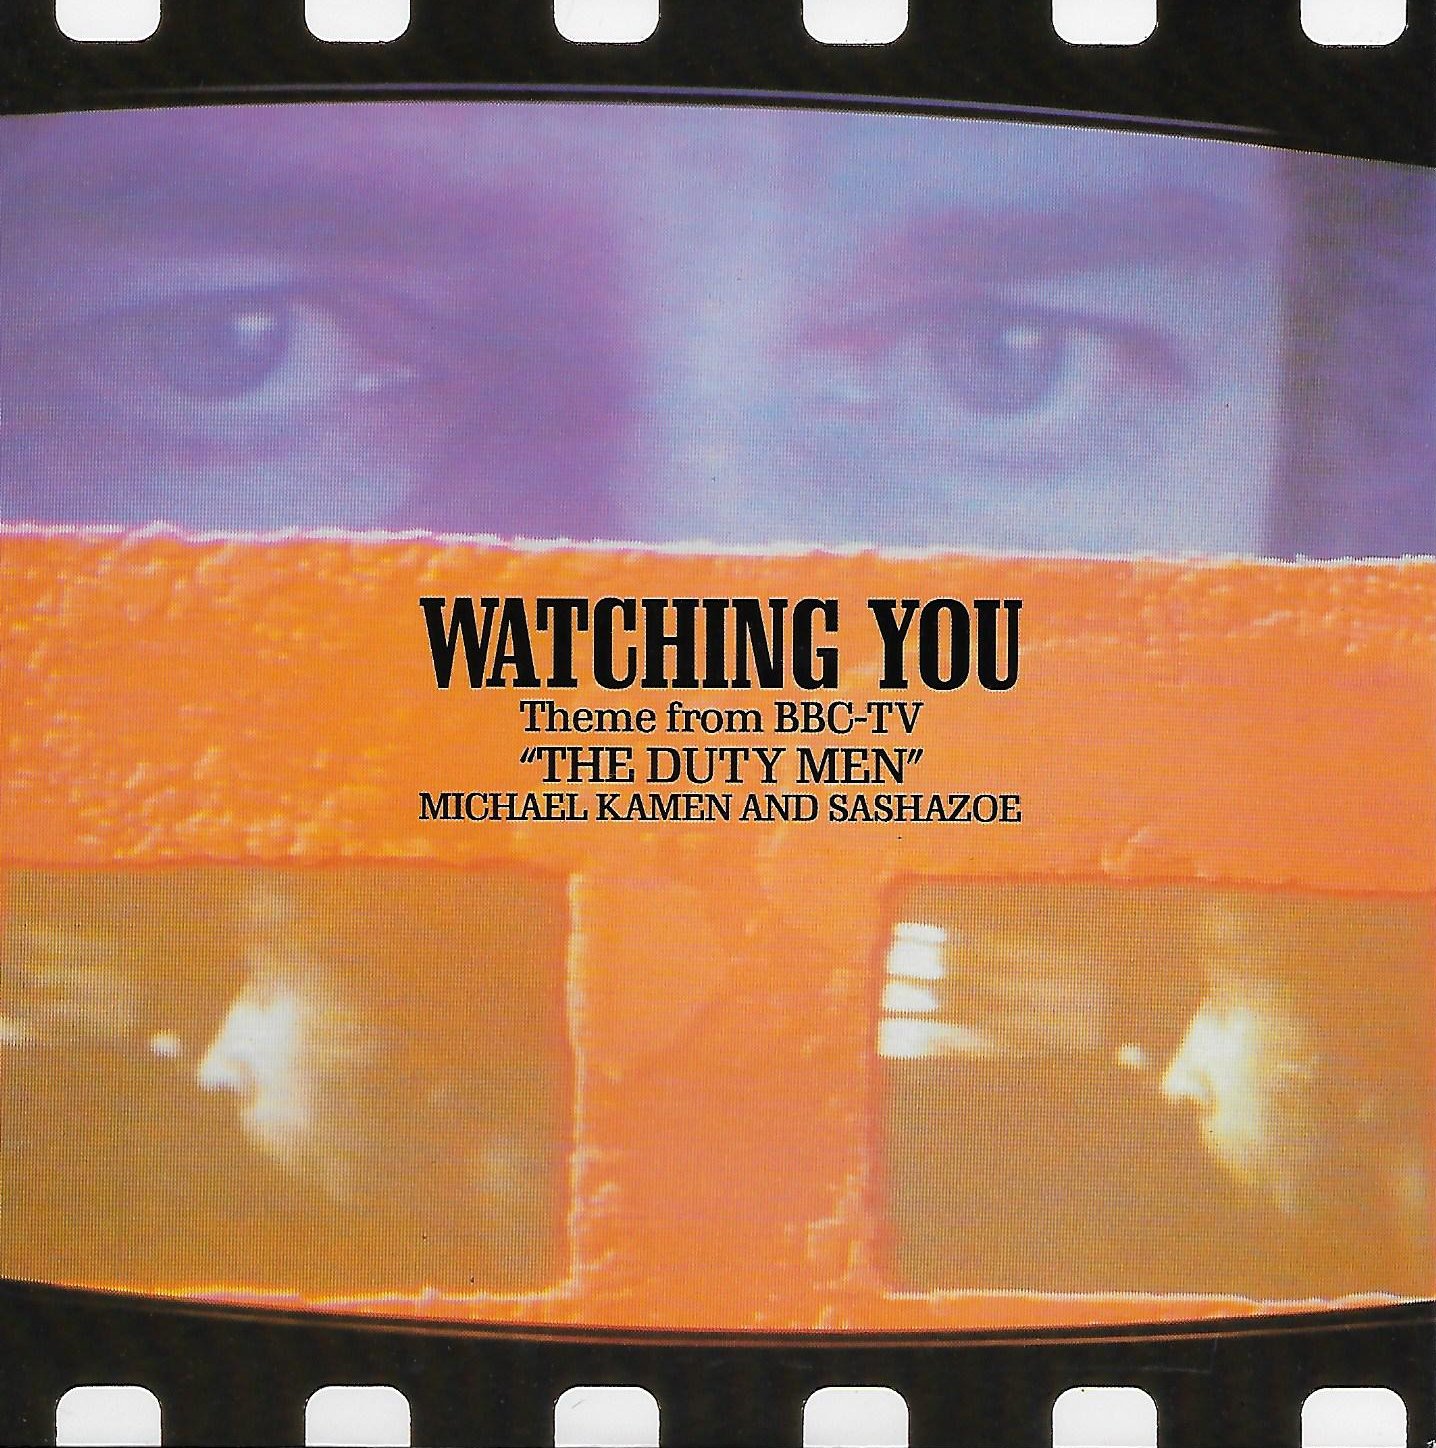 Picture of RESL 215 Watching you (The duty men) by artist Michael Kamen and Sashazoe from the BBC singles - Records and Tapes library